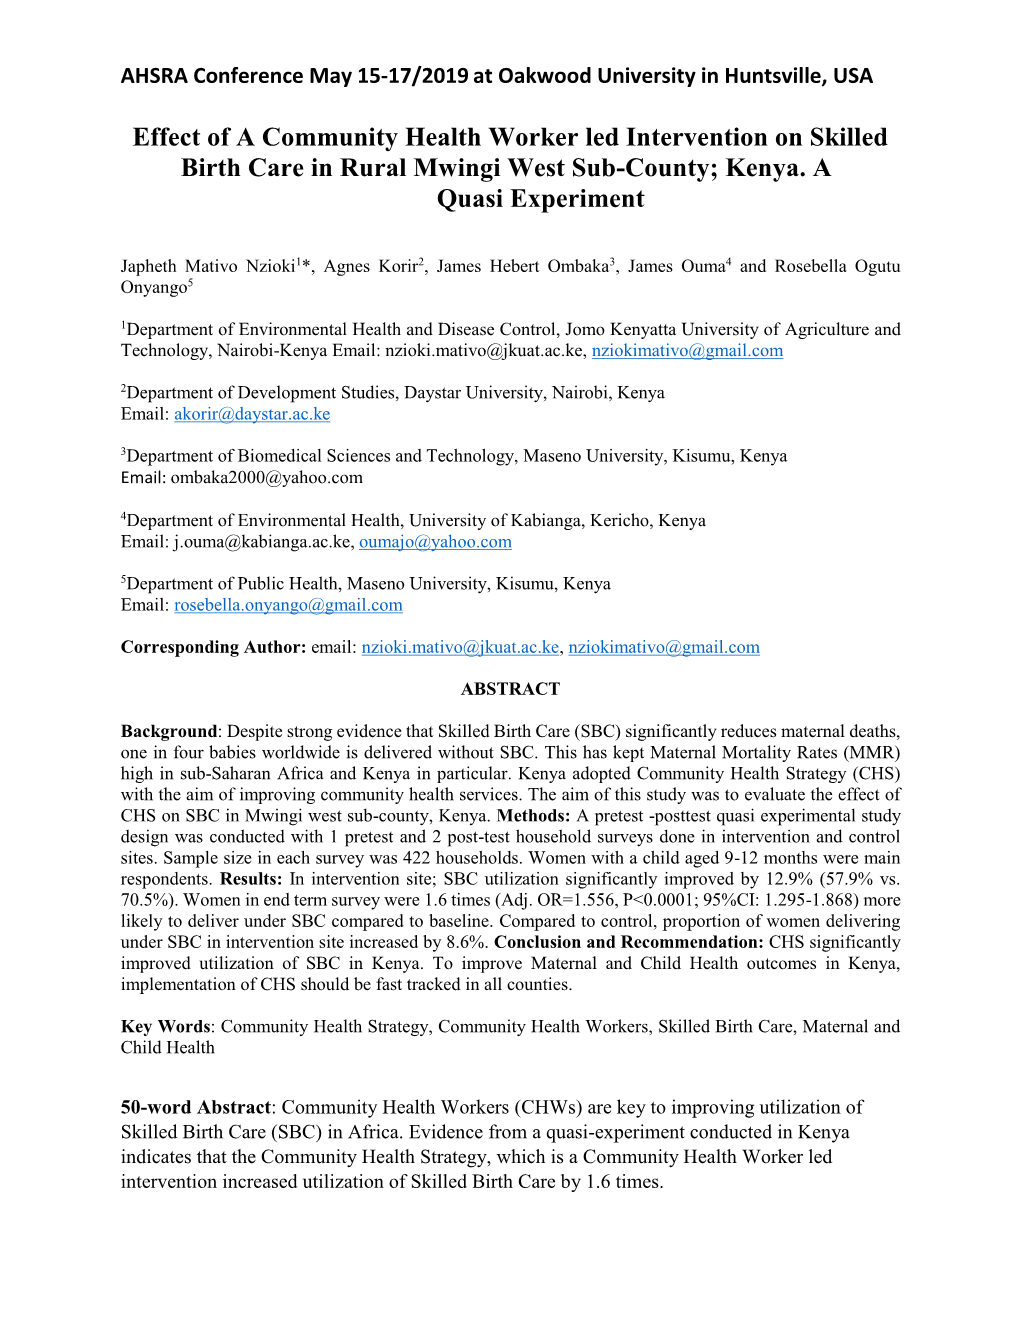 Effect of a Community Health Worker Led Intervention on Skilled Birth Care in Rural Mwingi West Sub-County; Kenya